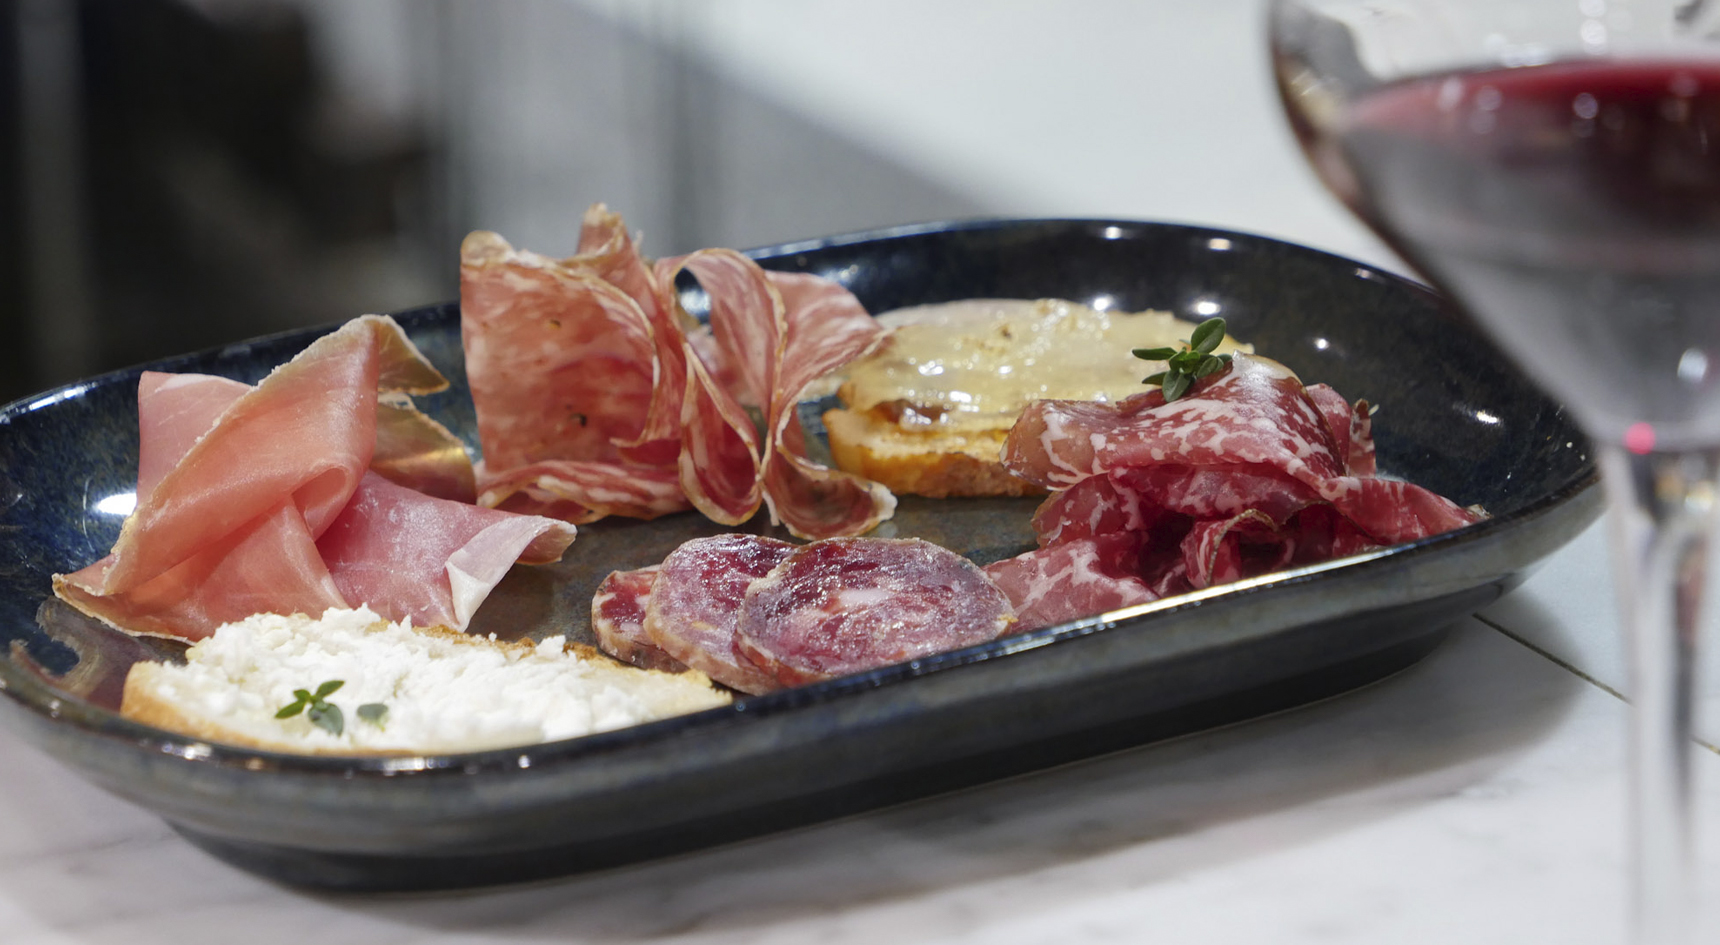 A variety of cured meats on a plate with bread and a wine glass to the side of the image.